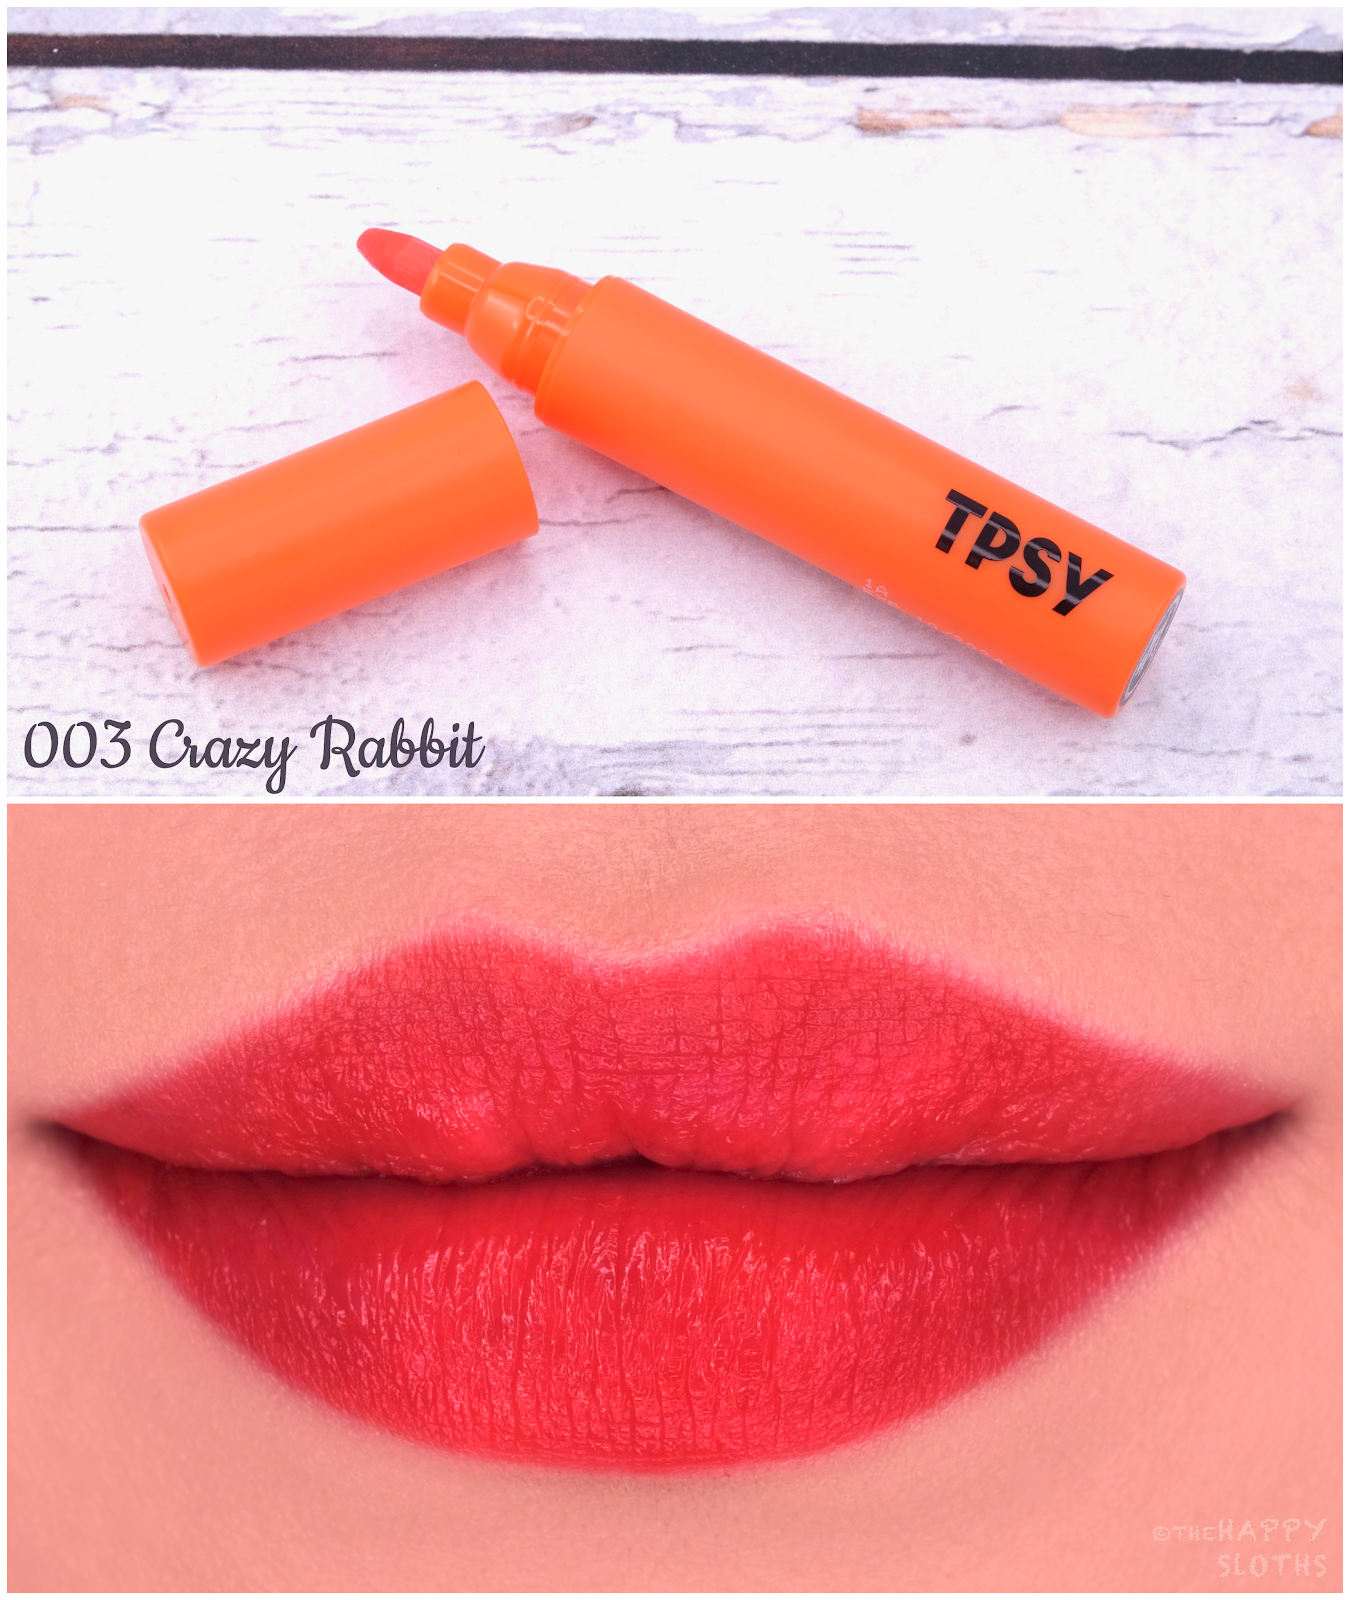 TPSY | Forever Lip Marker in "003 Crazy Rabbit": Review and Swatches